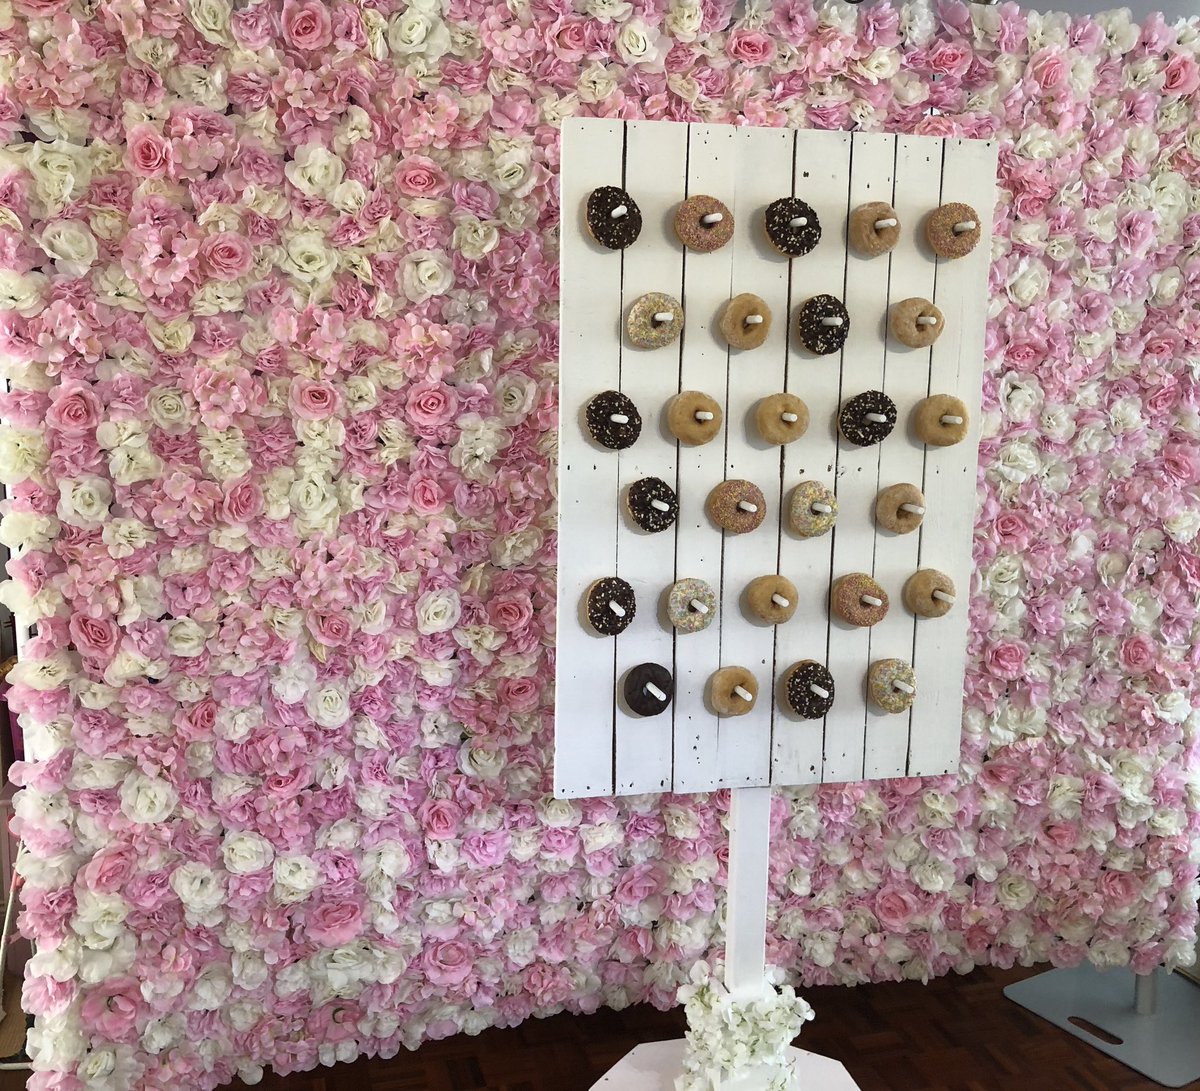 💐Flower Wall & Donut Wall set up for a special birthday party💐
Get in touch to book 
kenteventsphotobooth.com 
.
.
#flowerwall #donutwall #weddinginspo #wedding #kentbride #bride #birthday #party #events #eventplanner